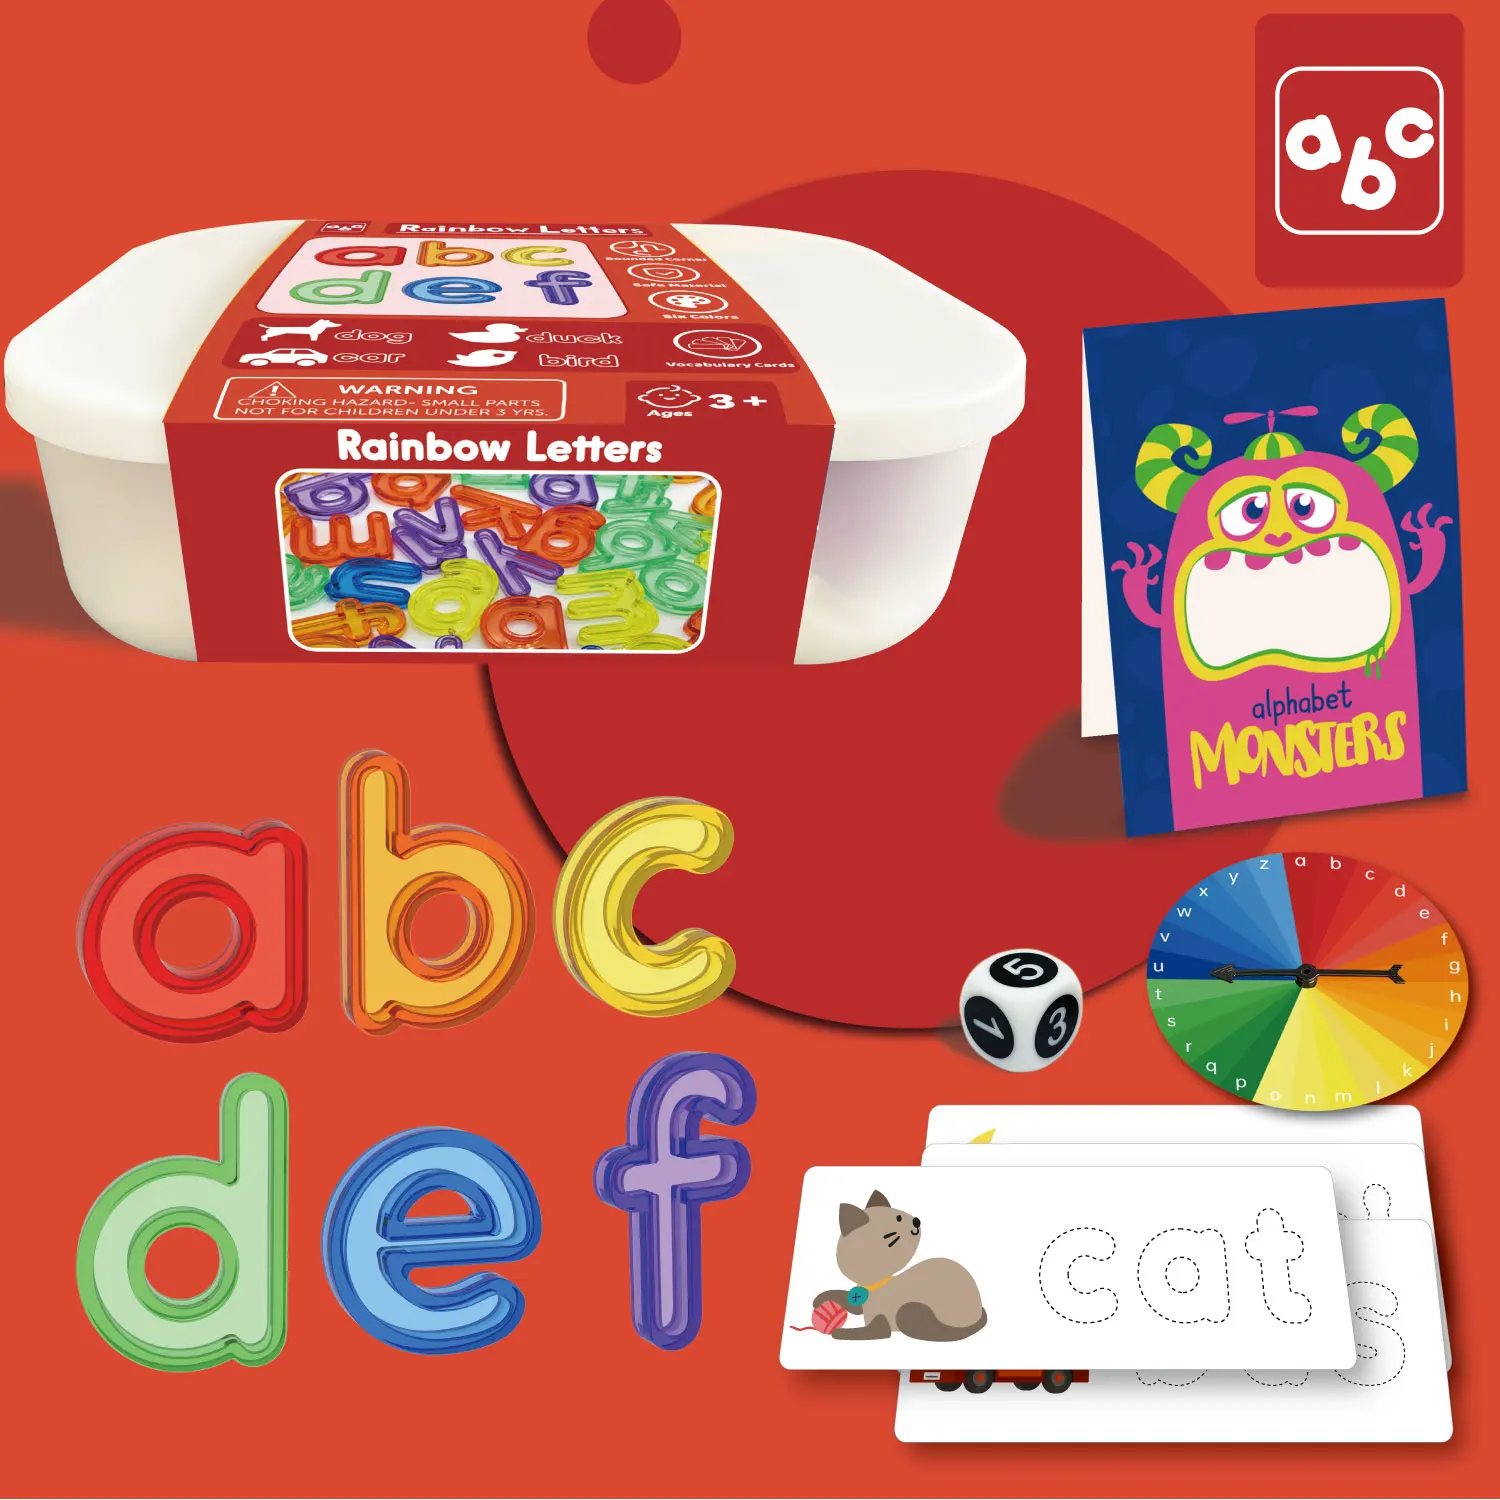 

Alphabet Spelling Learning Toys - Match Alphabet Spelling Games Vision Games, Educational Preschool Toys for Boys Ages 2 to 4 -